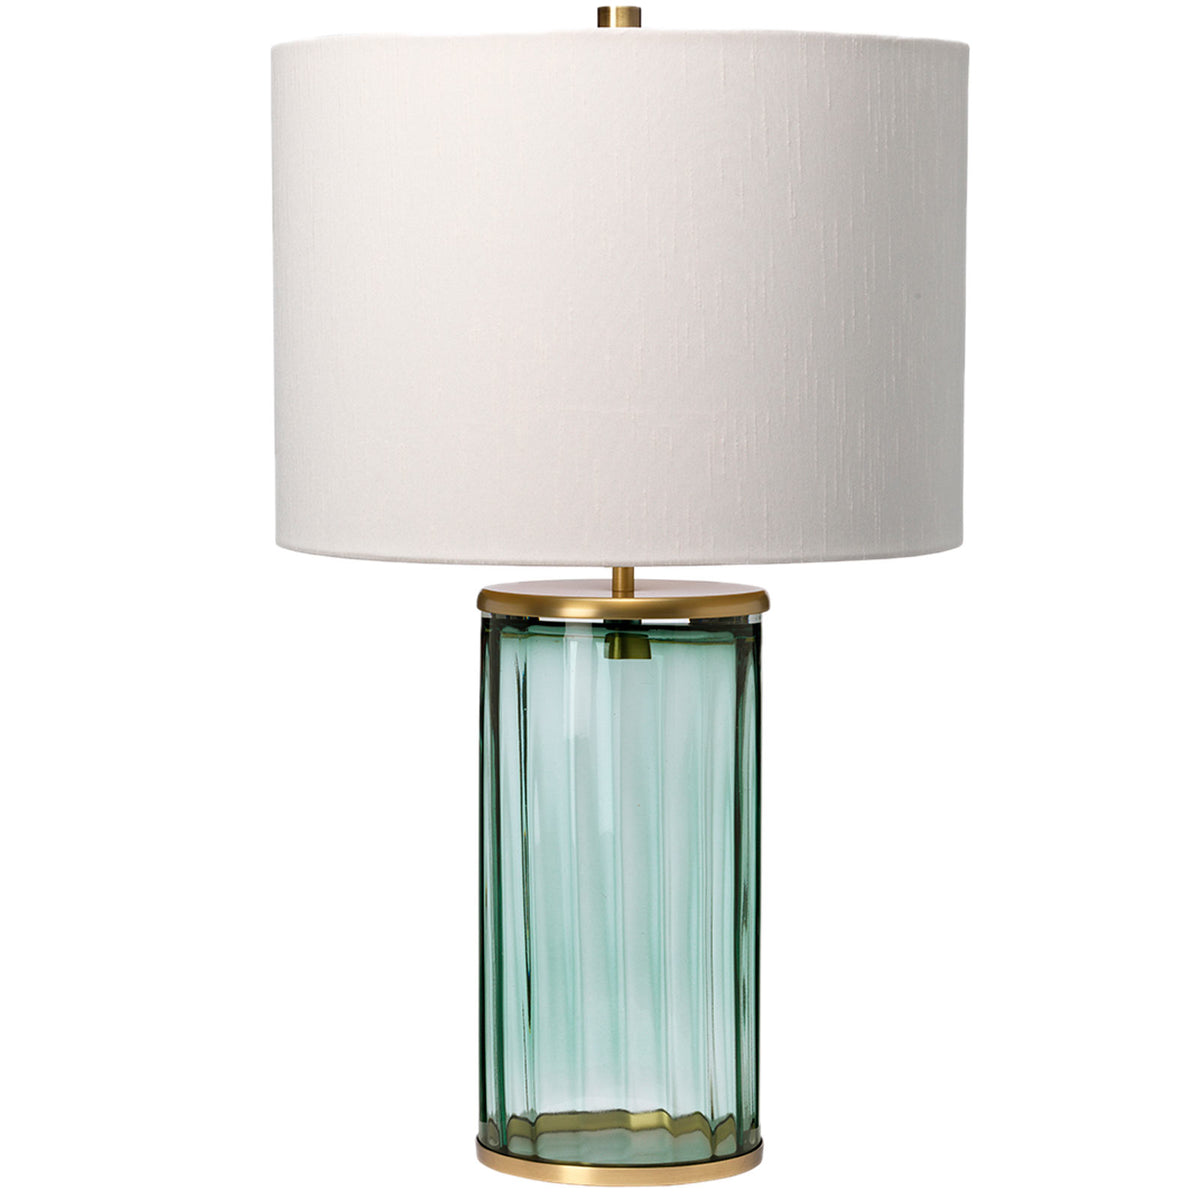 Reno Green Table Lamp, Aged Brass